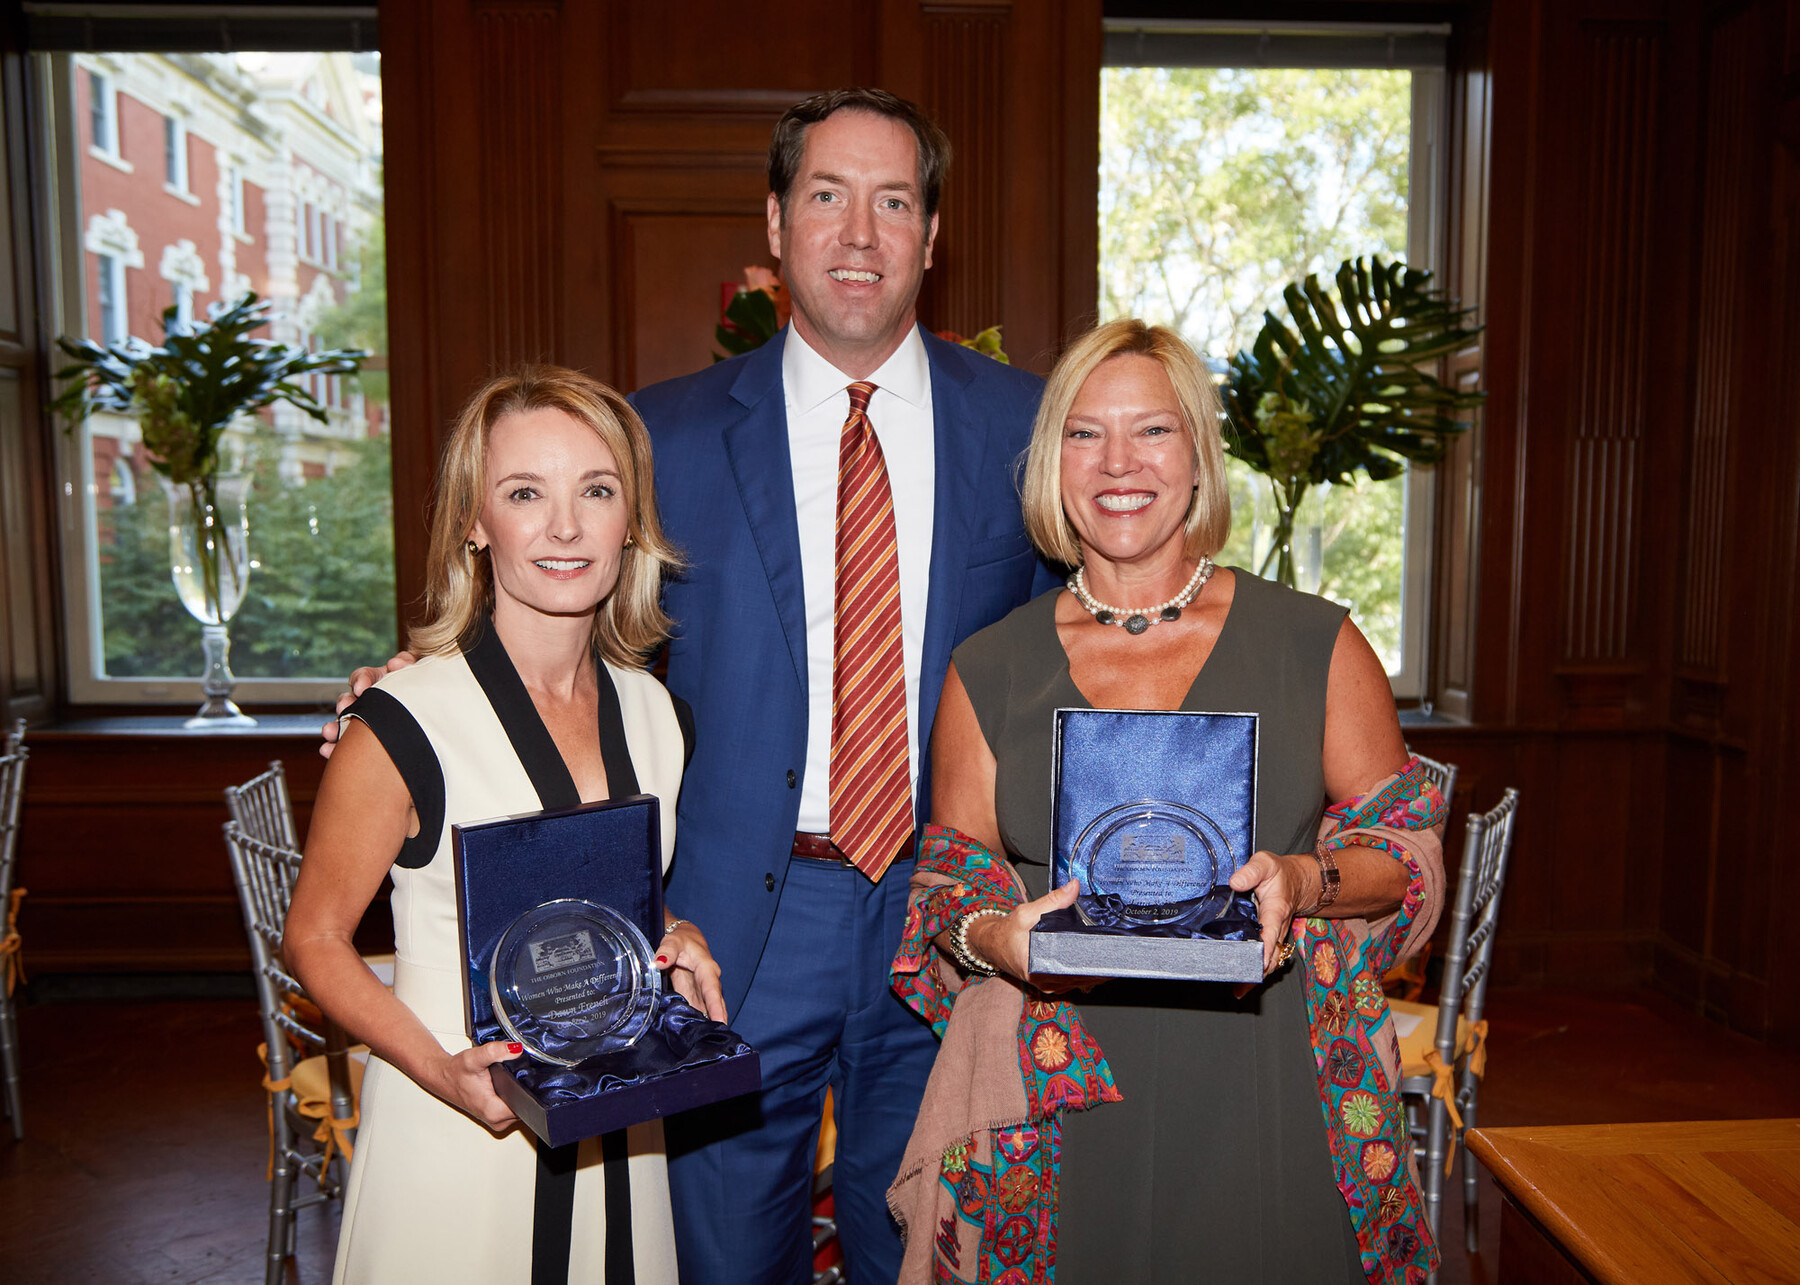 The Osborn Honors “Women Who Make a Difference” - The Osborn